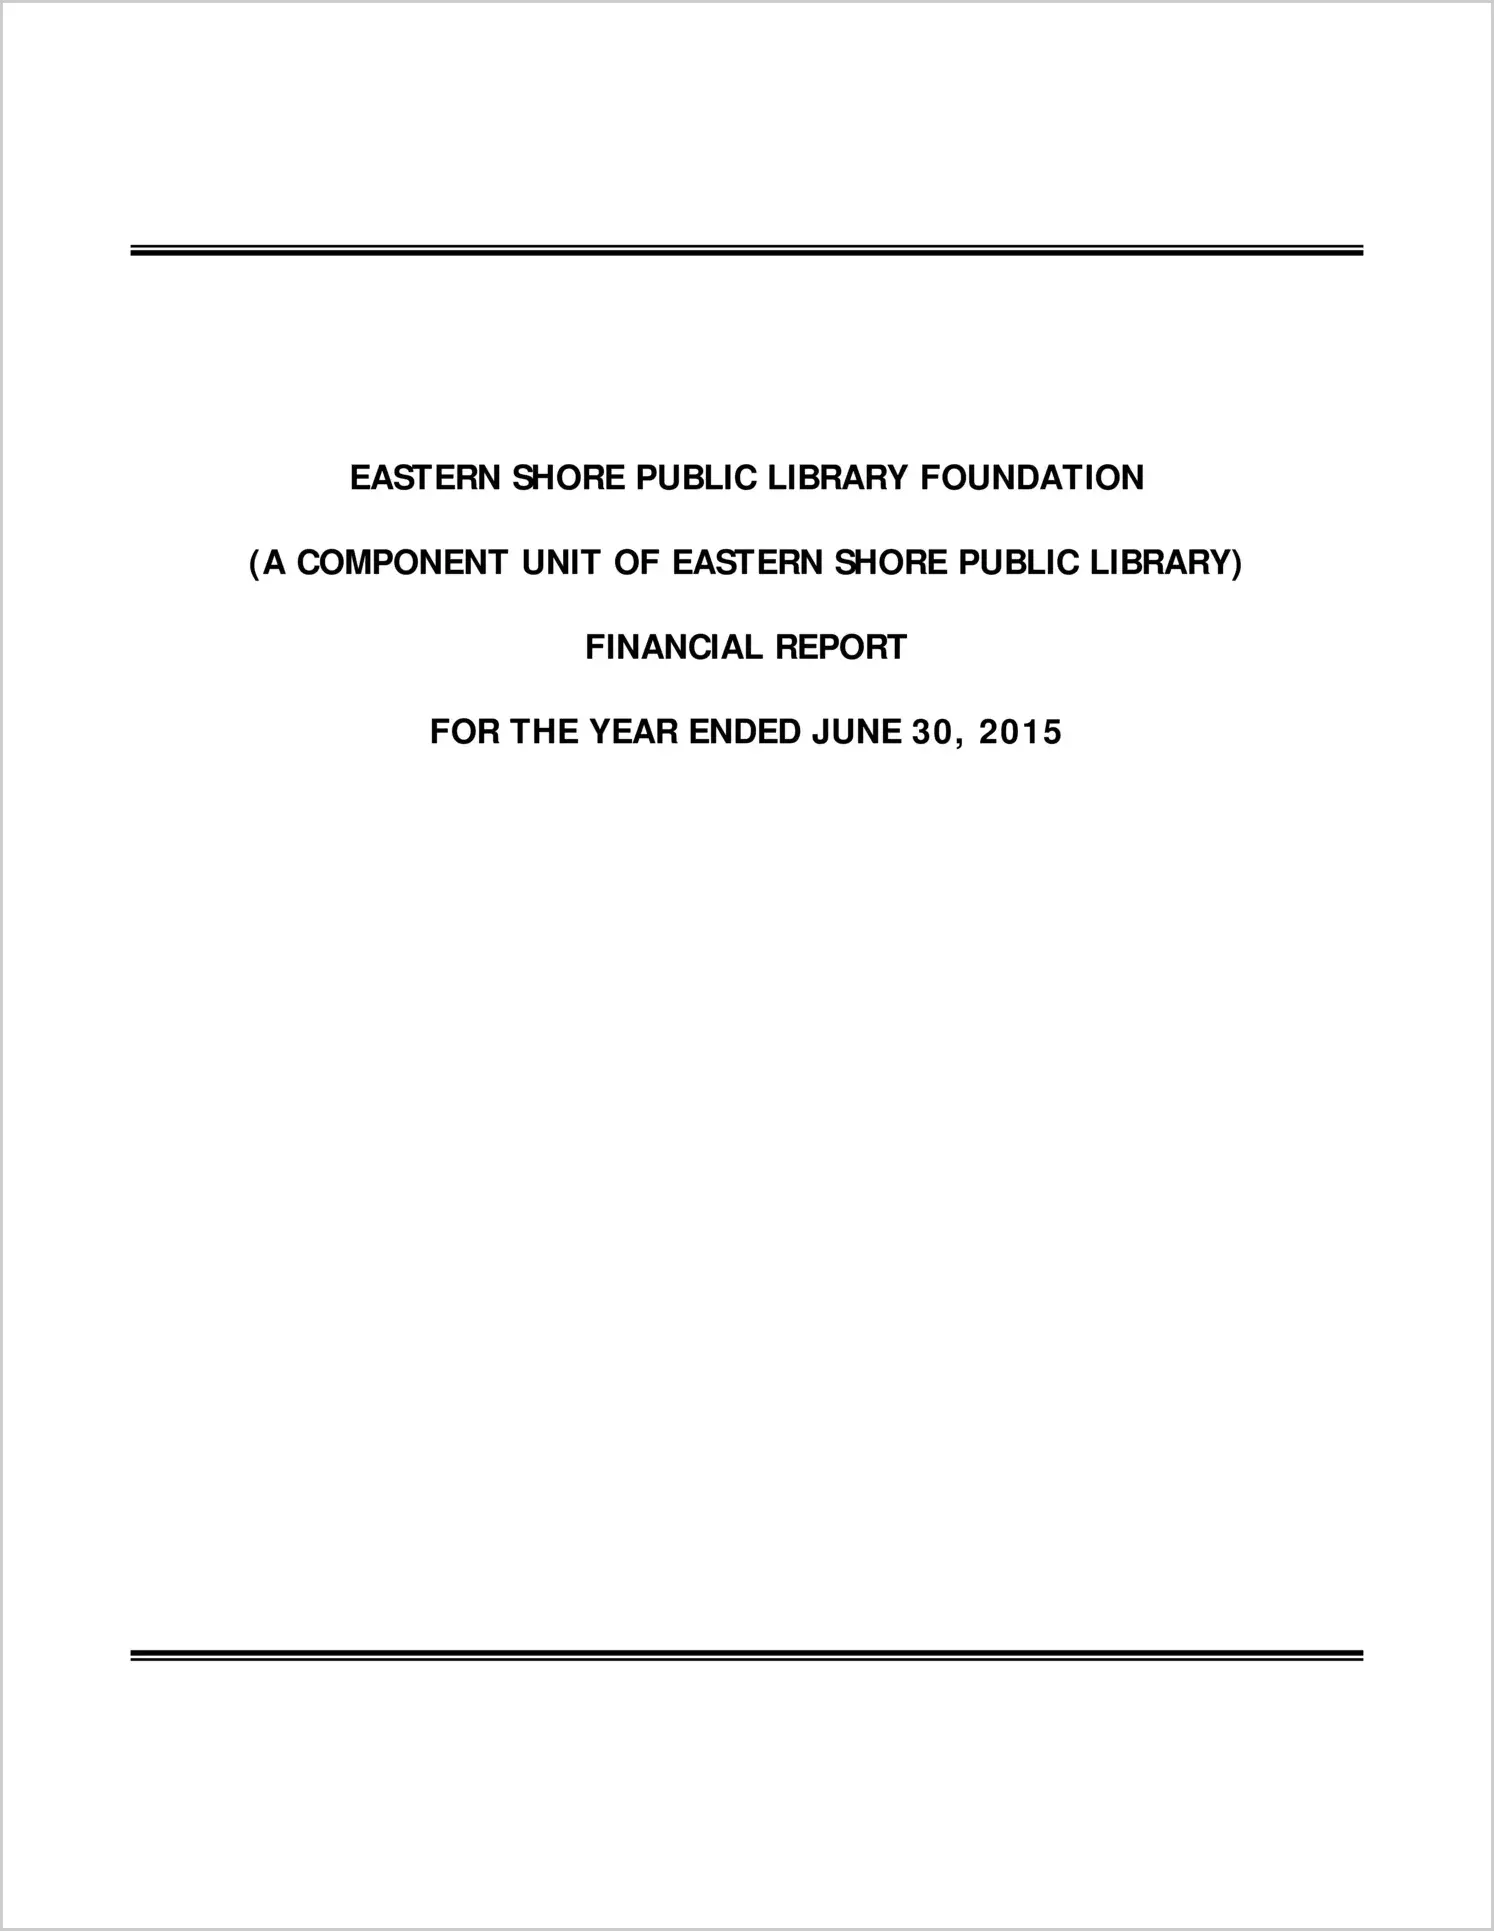 2015 ABC/Other Annual Financial Report  for Eastern Shore Public Library